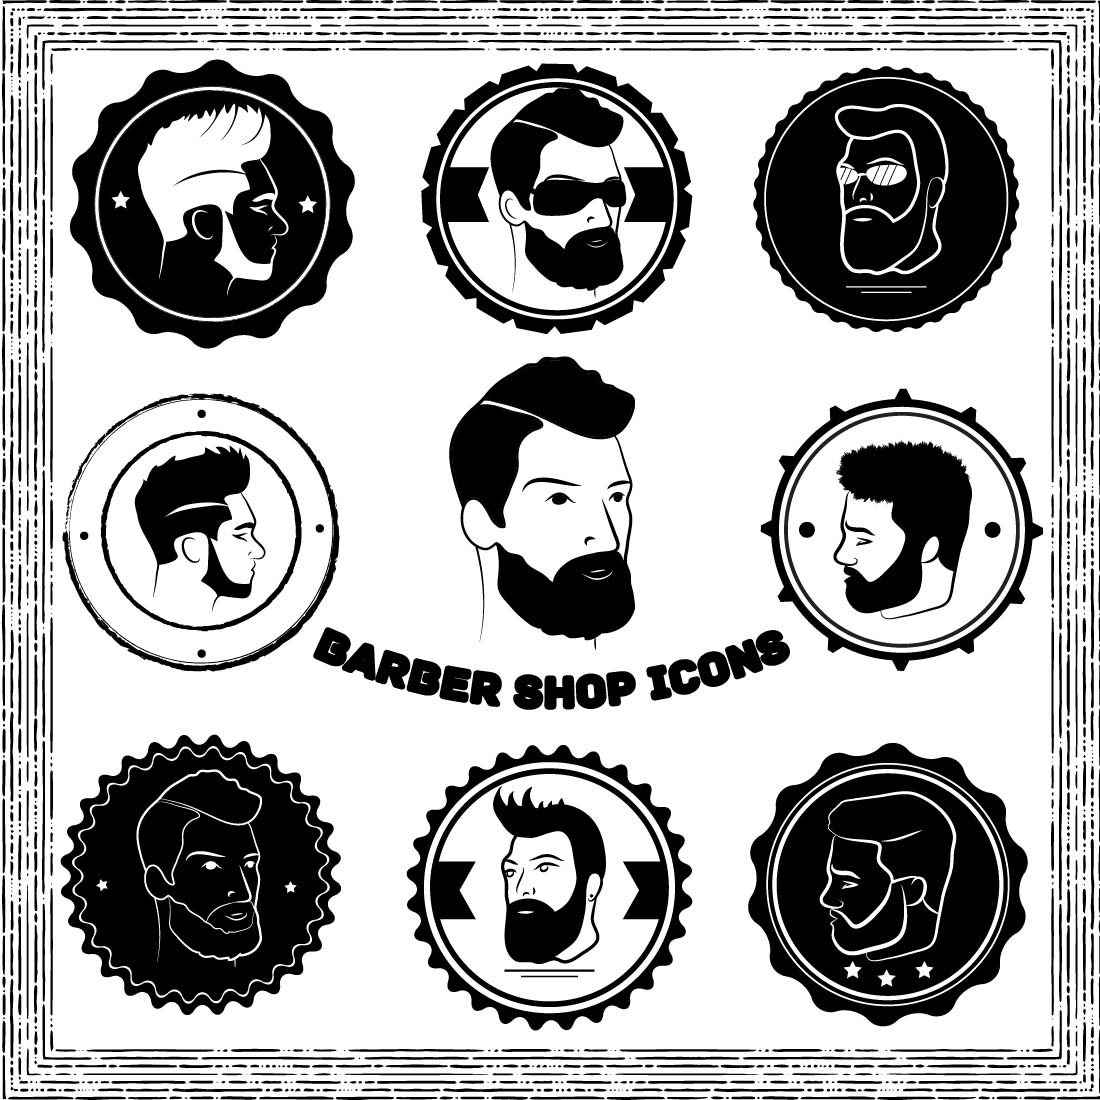 Barber Shop Icons cover image.